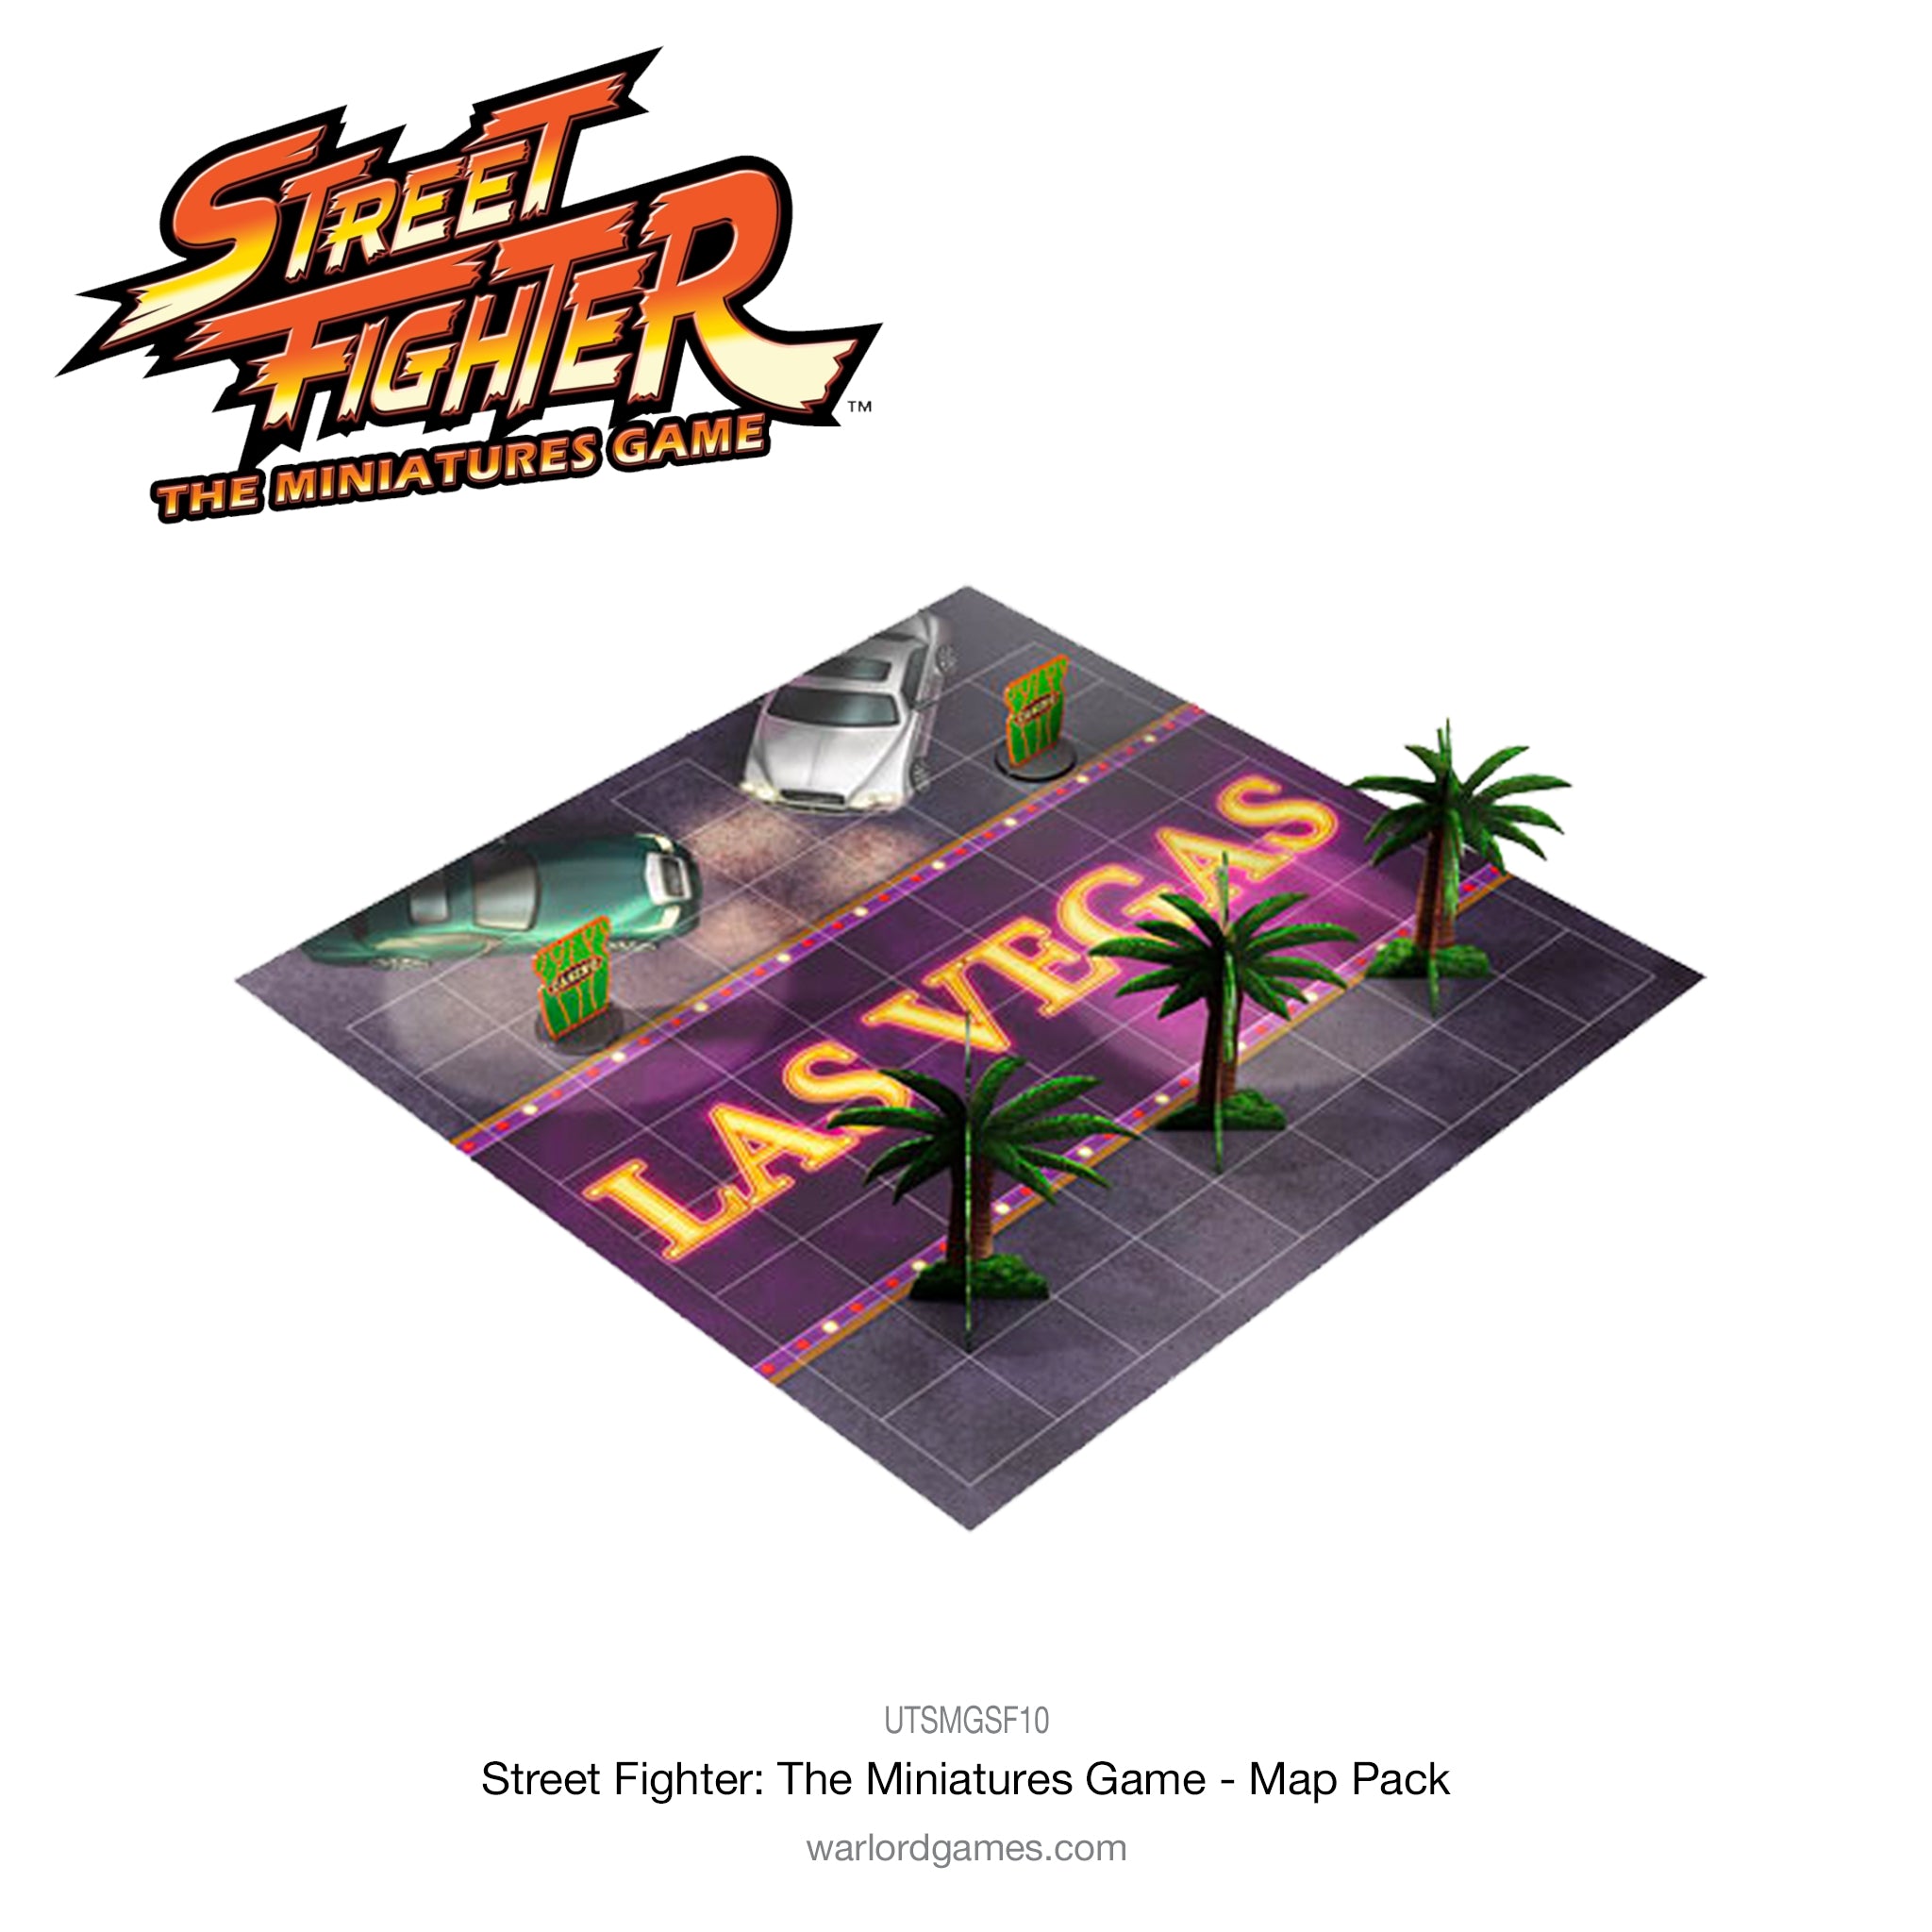 Street Fighter: The Miniatures Game - Map Pack